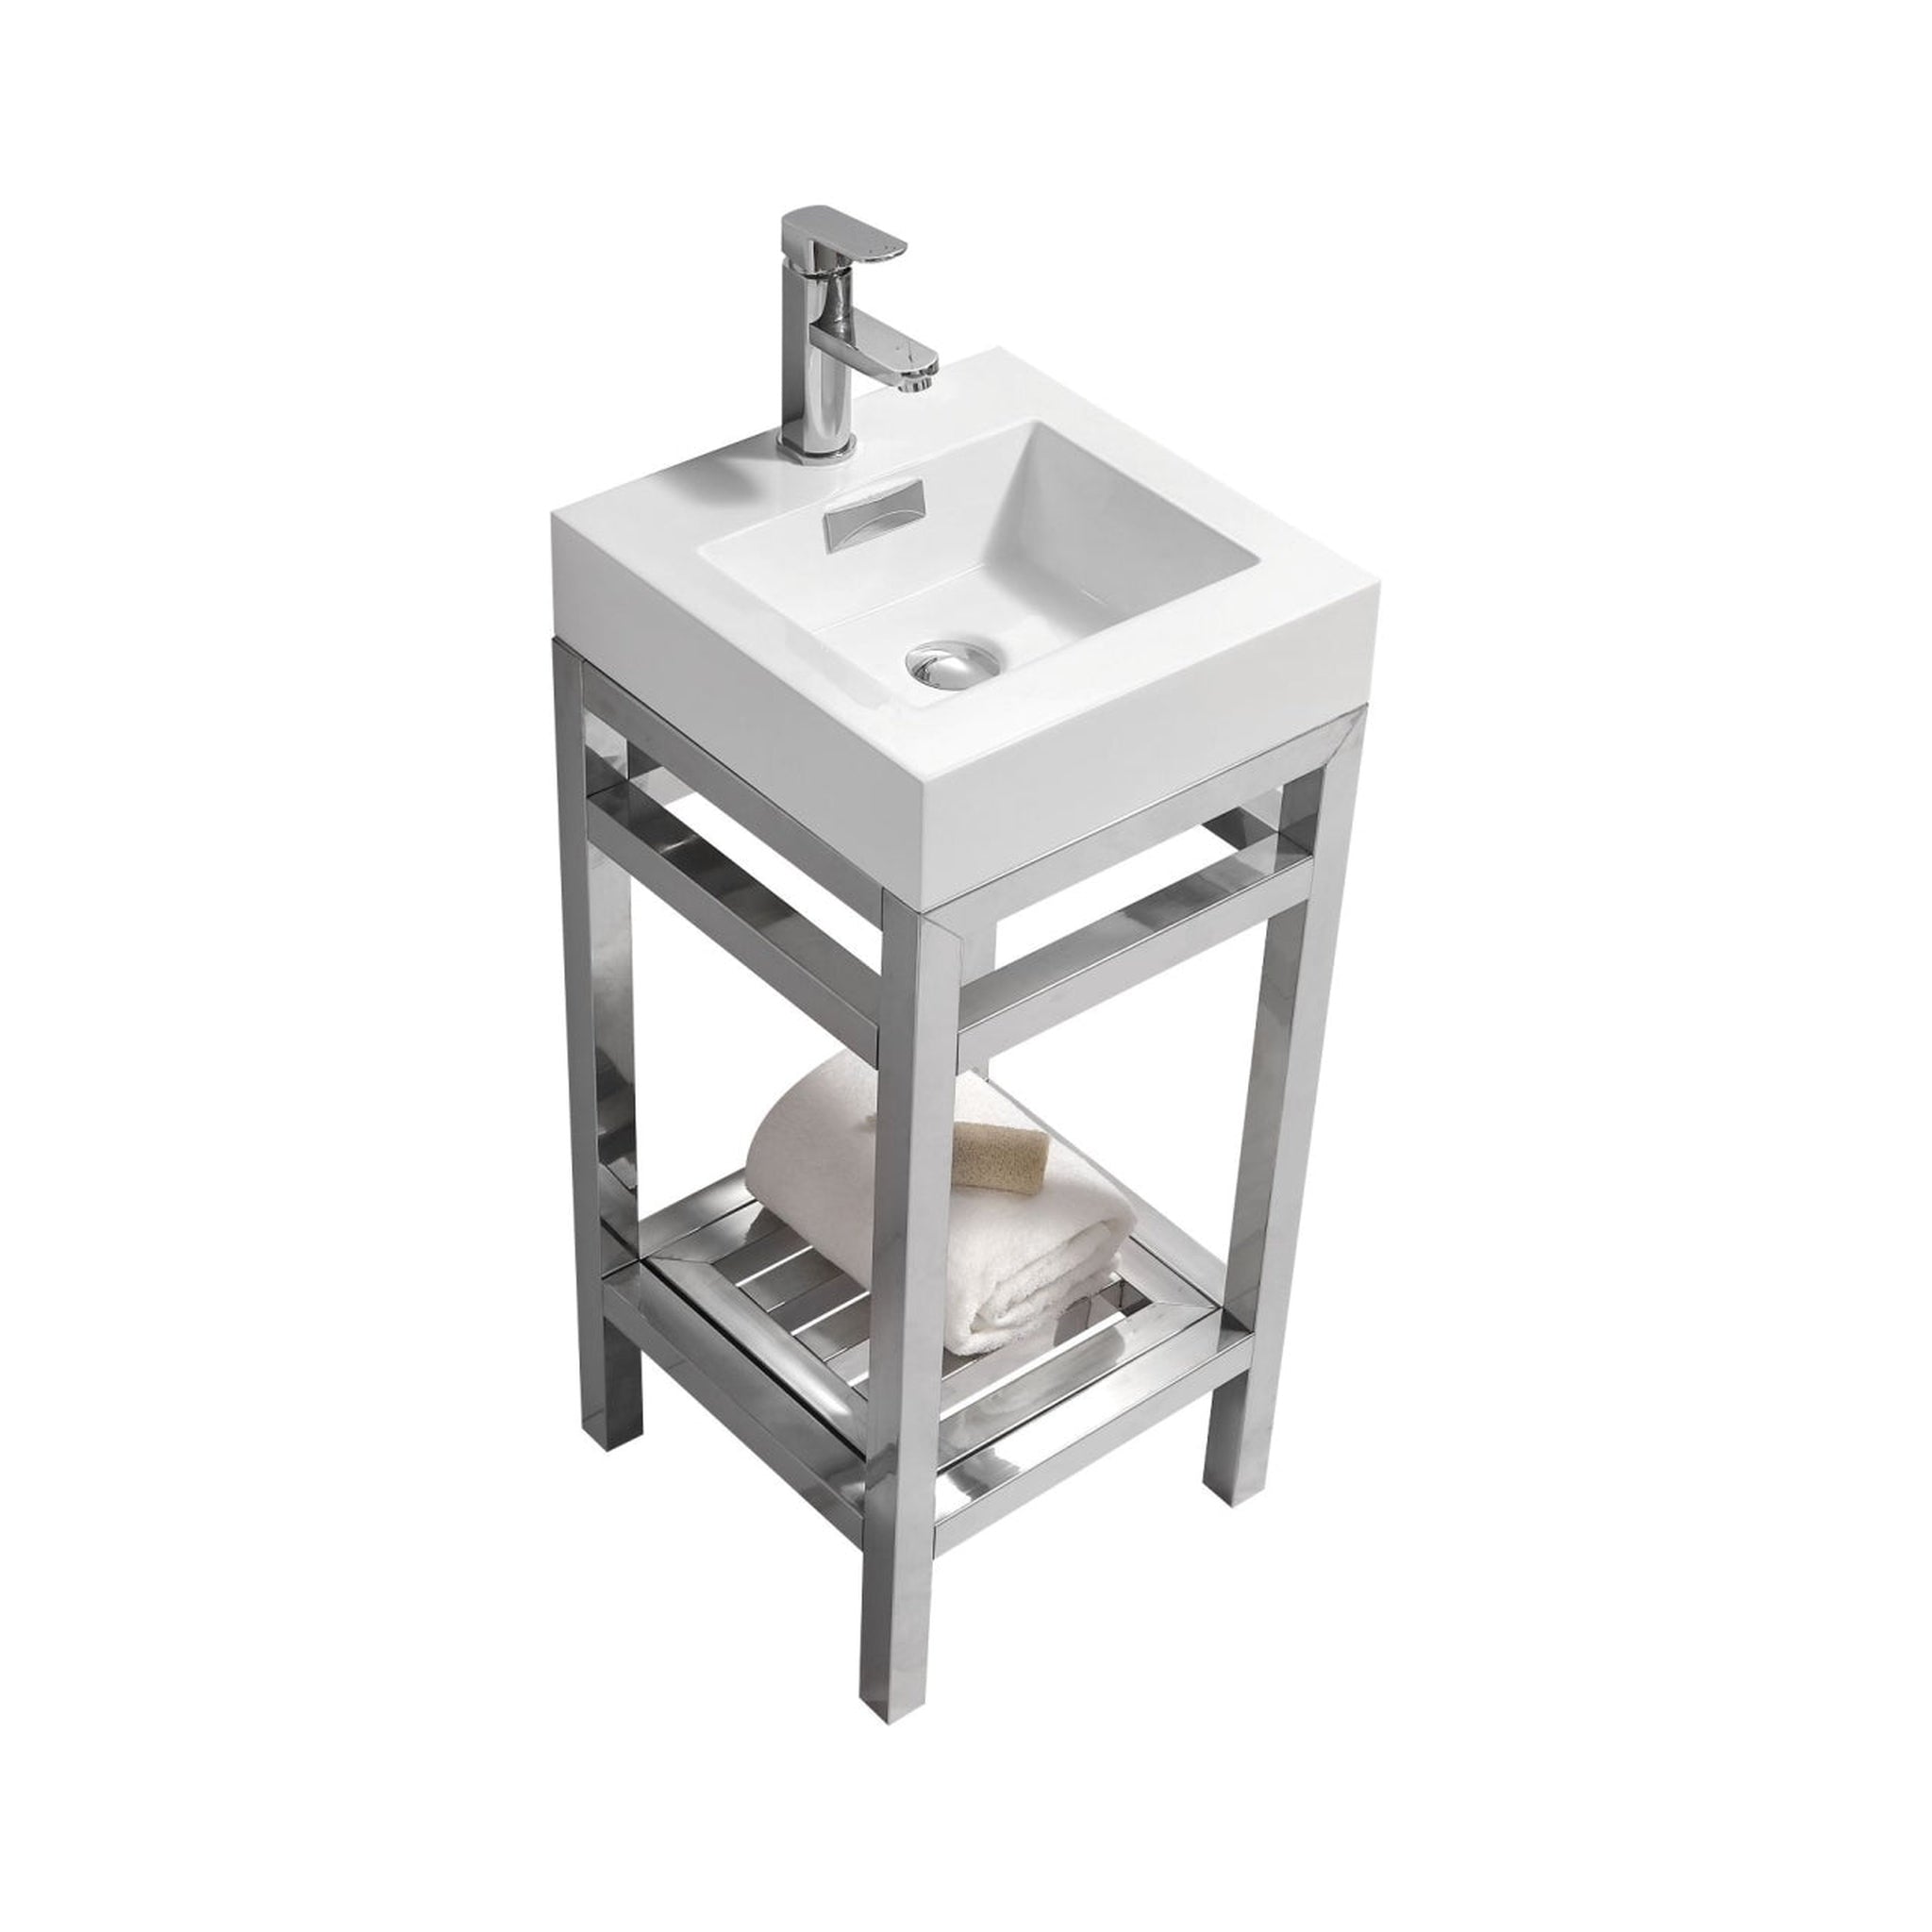 KubeBath, KubeBath Cisco 16" Stainless Steel Chrome Console Freestanding Modern Bathroom Vanity With Single Integrated Acrylic Sink With Overflow and 24" White Framed Mirror